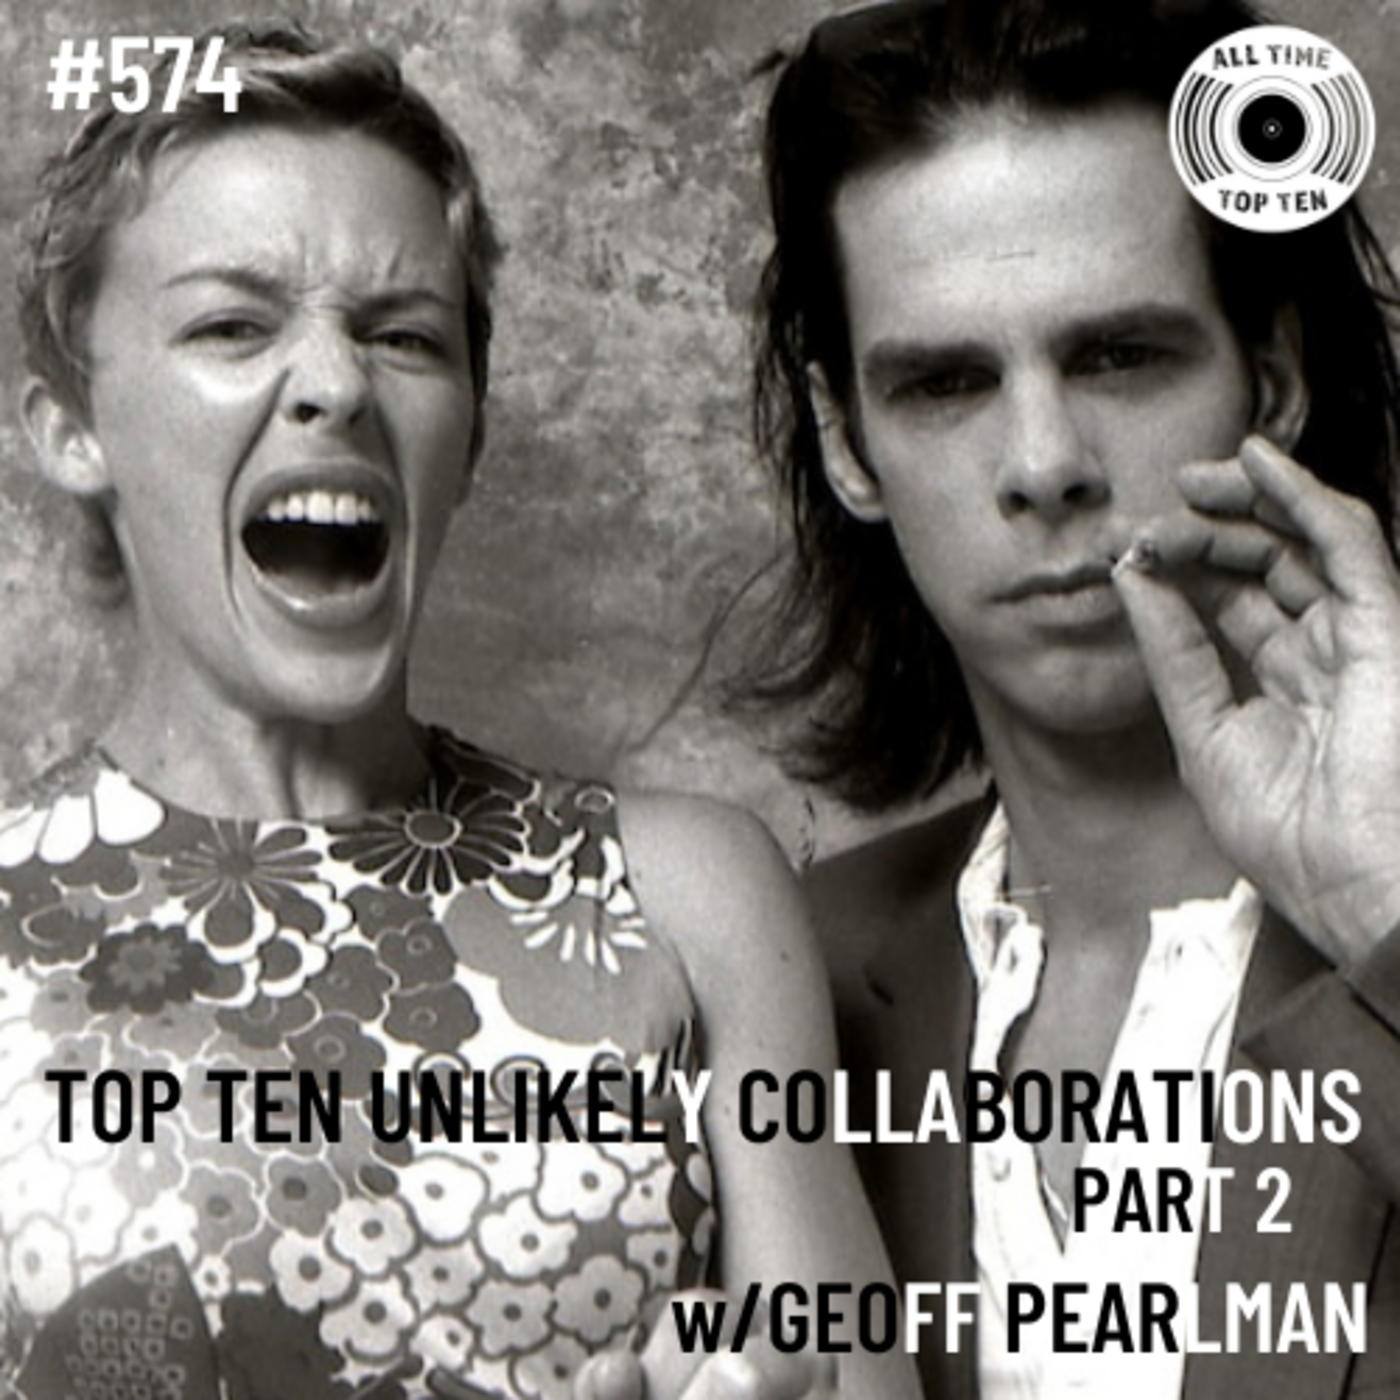 Episode 574 - Top Ten Unlikely Collaborations Part 2 w/Geoff Pearlman